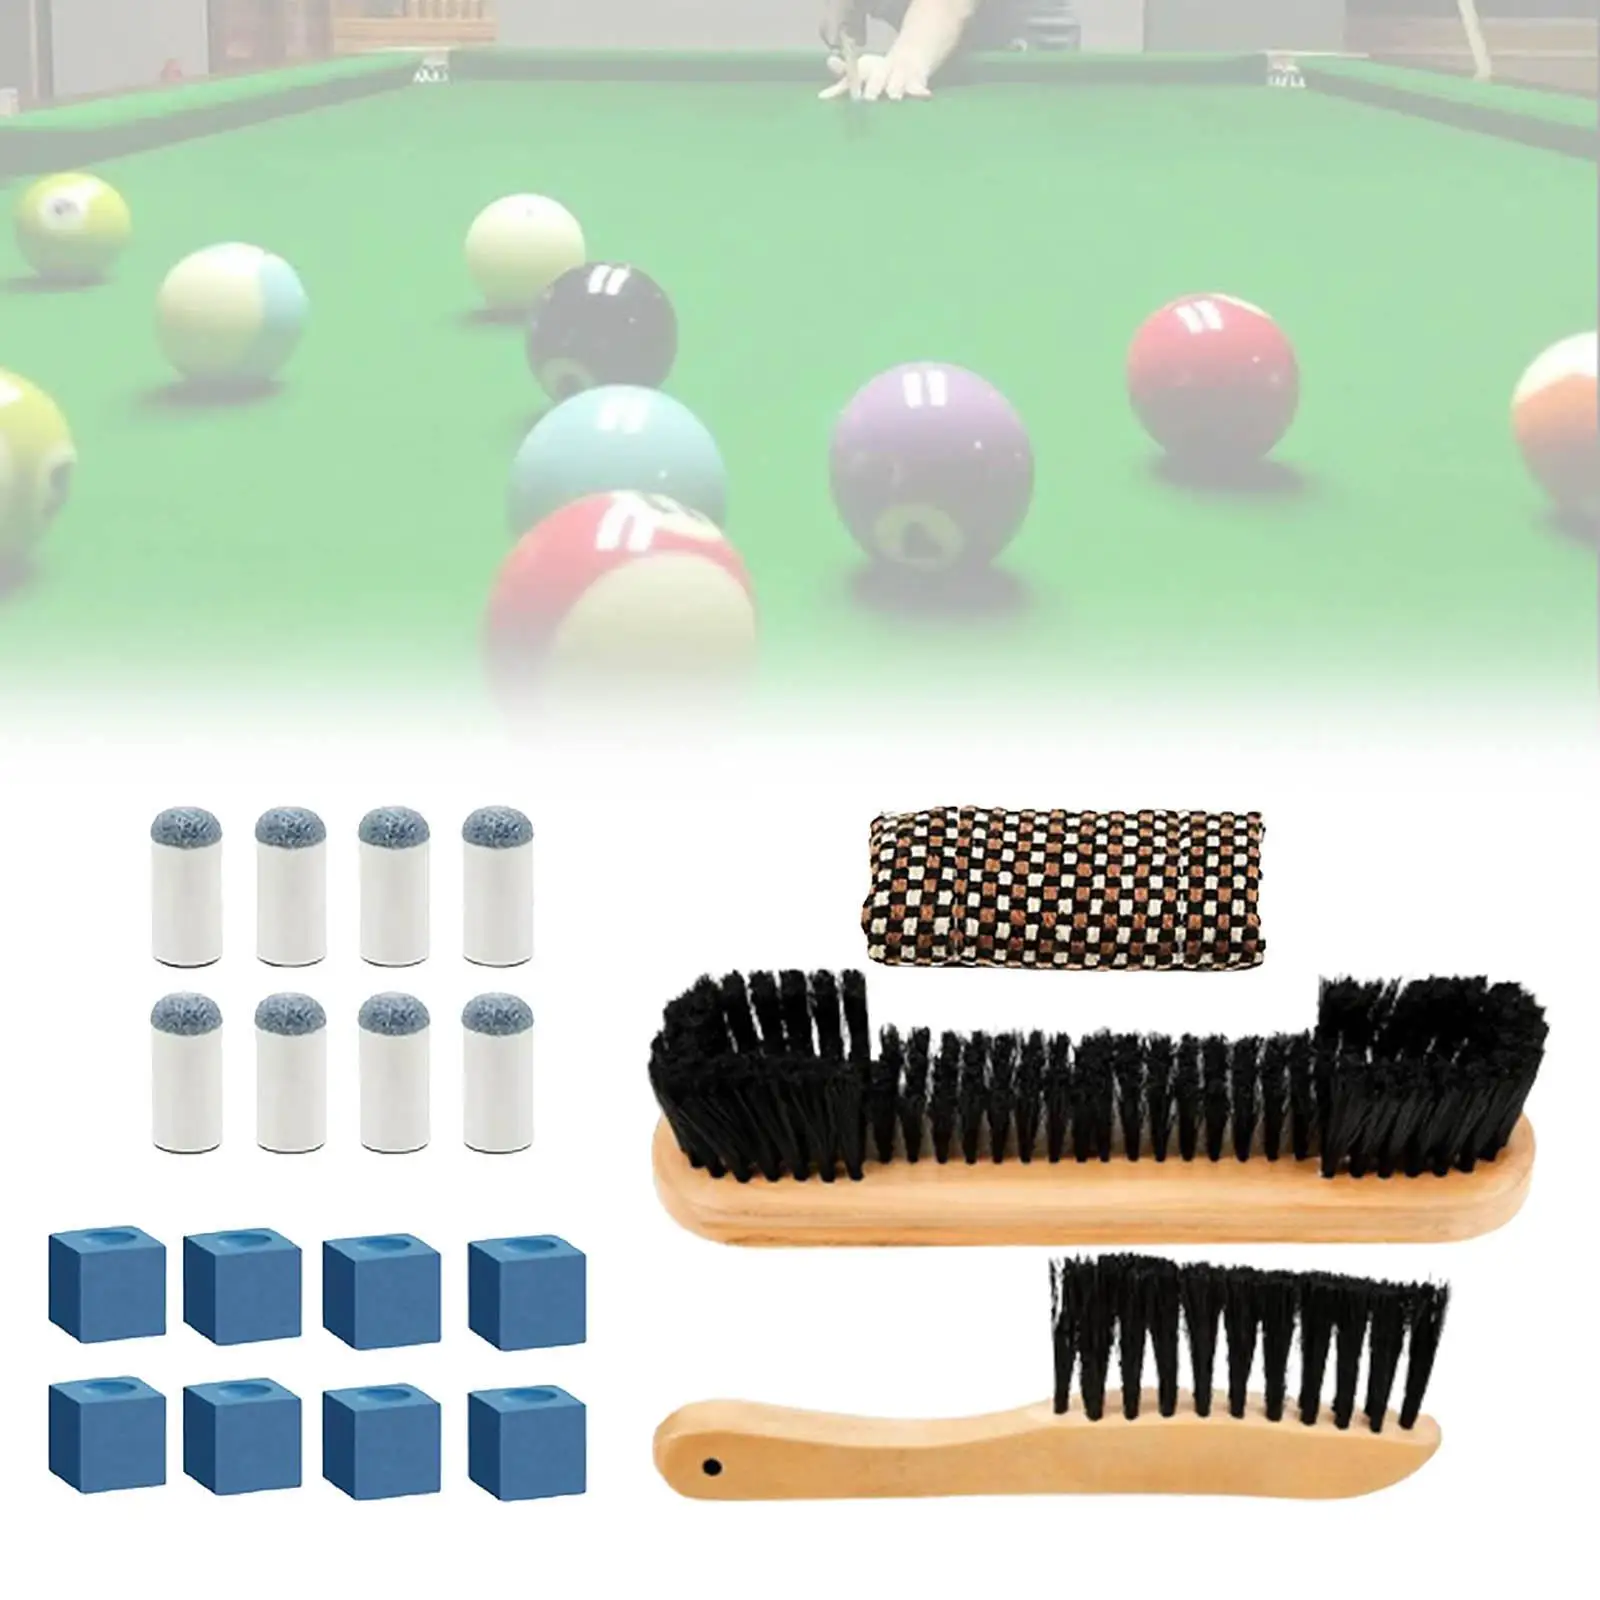 19 in 1 Billiards Pool Table and Rail Brush Set Cleaning Tool Cue Tips Replacements Wipe Pool Snooker Accessories